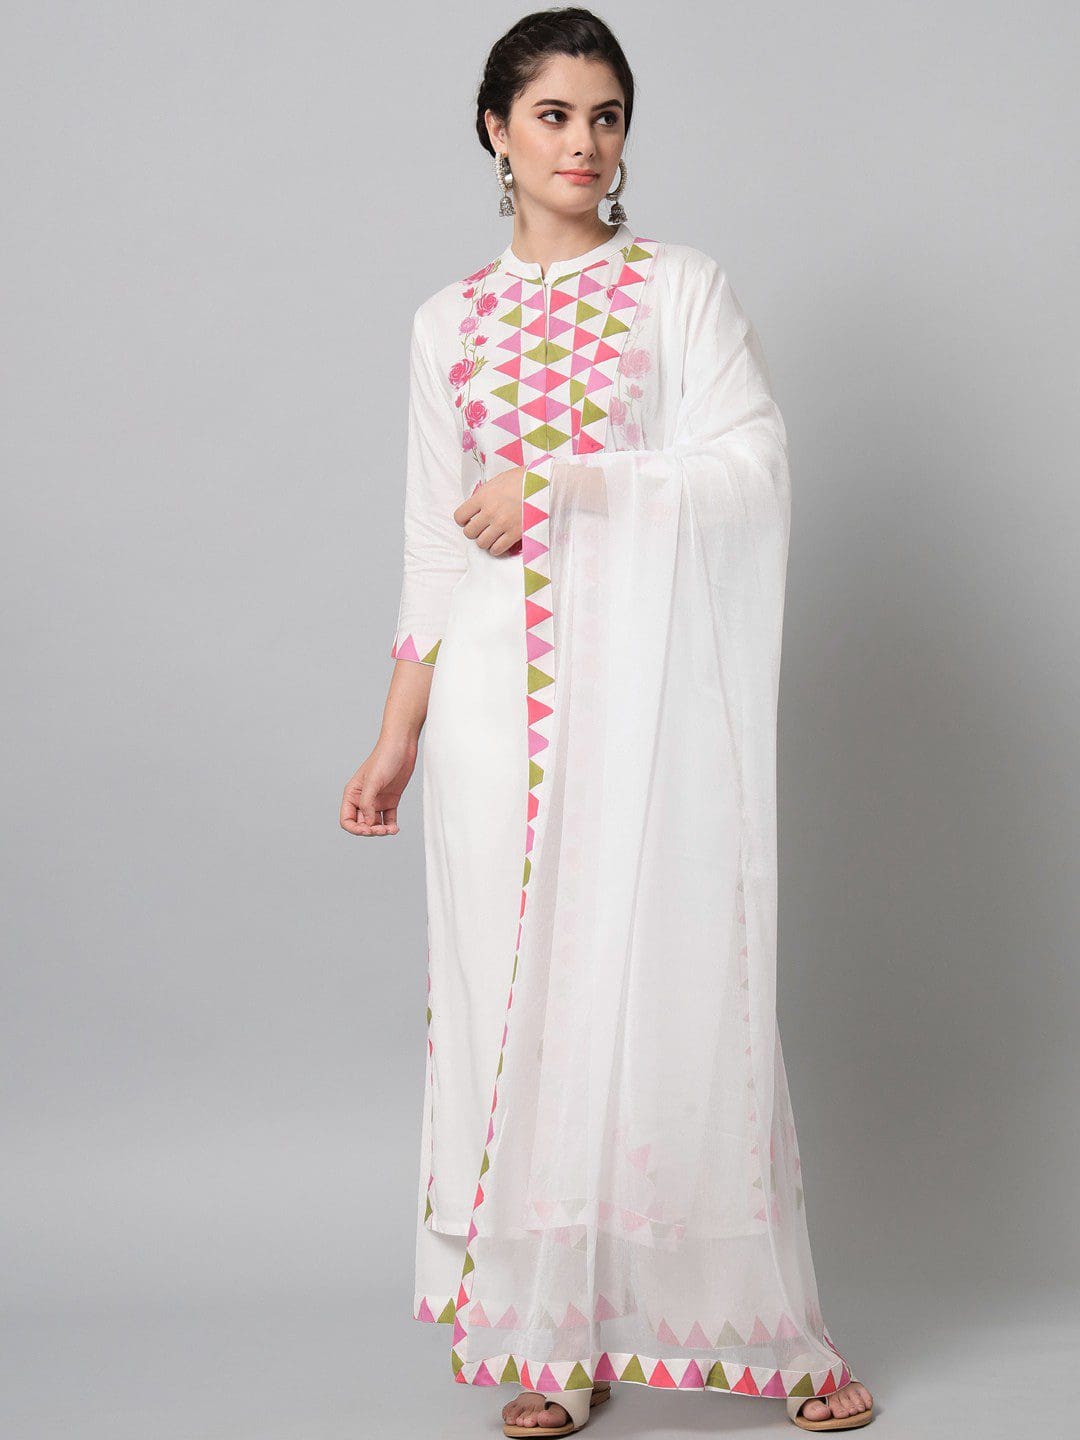 Elegant Rayon Fabric Color White And Multi Color Triangle Shape And Flower Printed Kurta Trouser Set